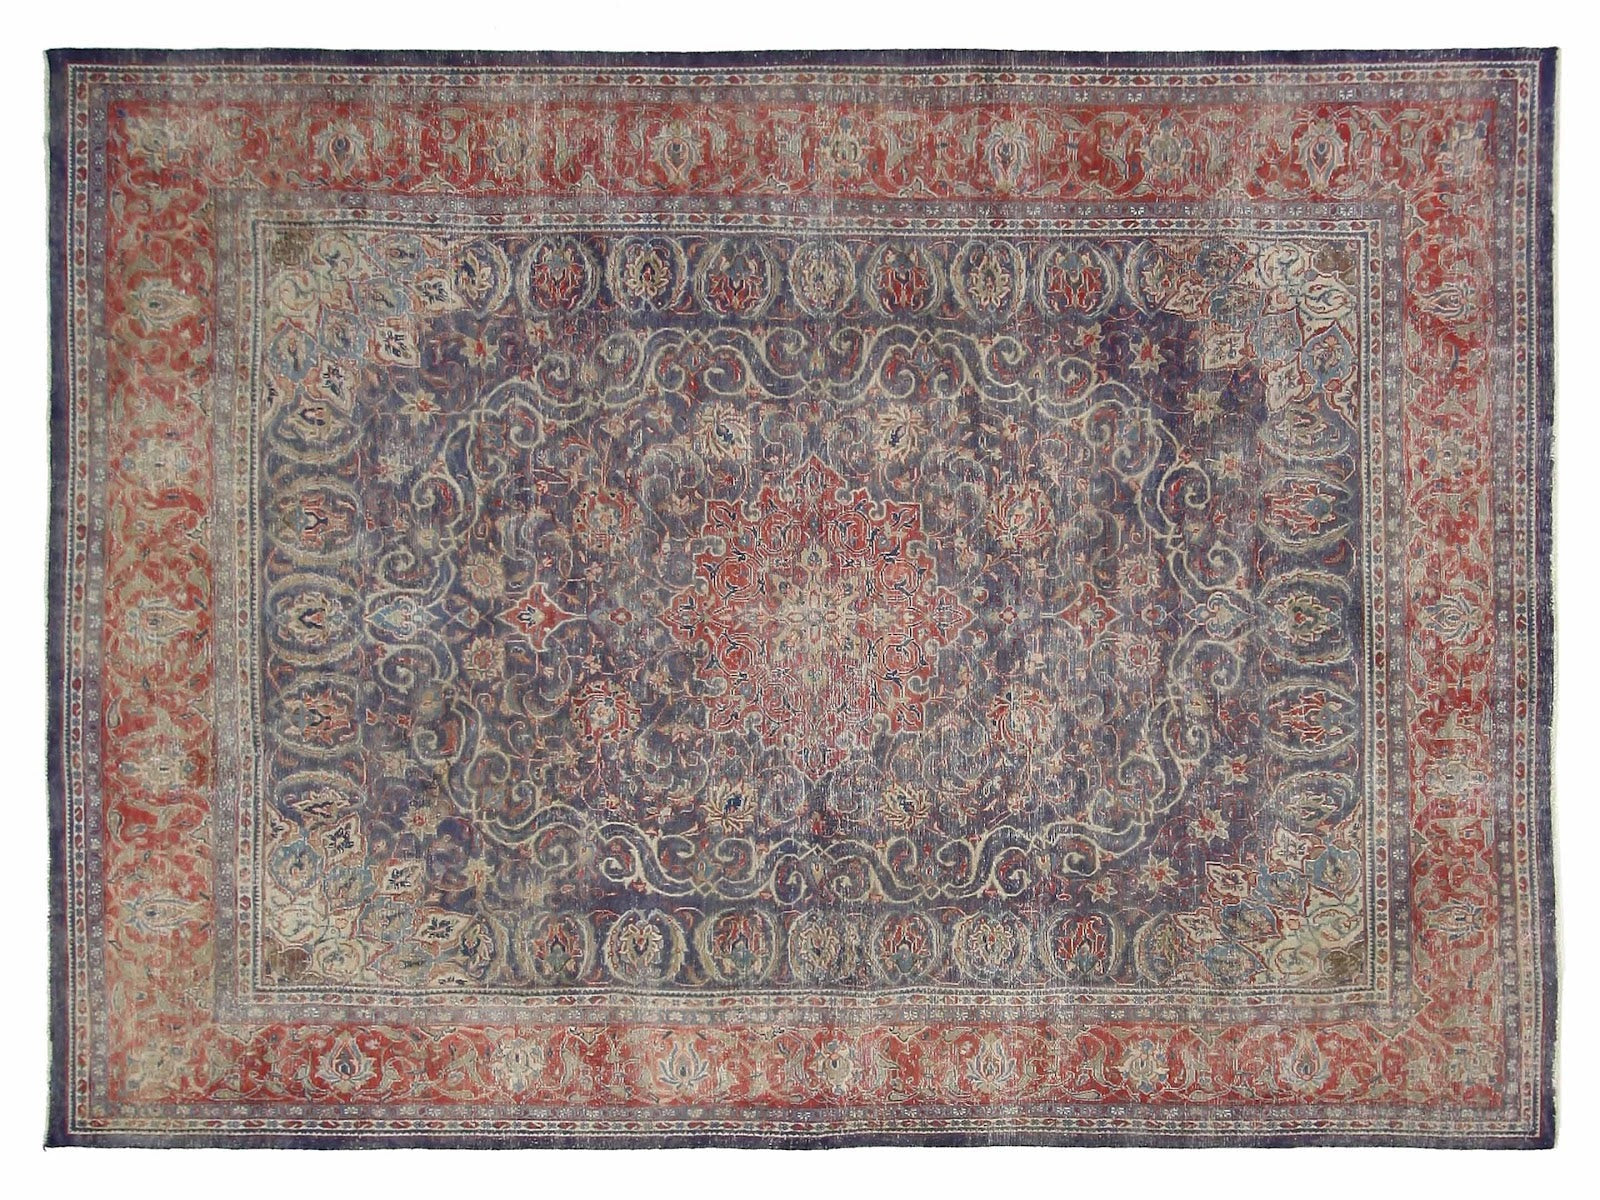 10x14 vintage Persian wool rug with a red medallion and border set against a blue main color, symbolizing Persian craftsmanship.